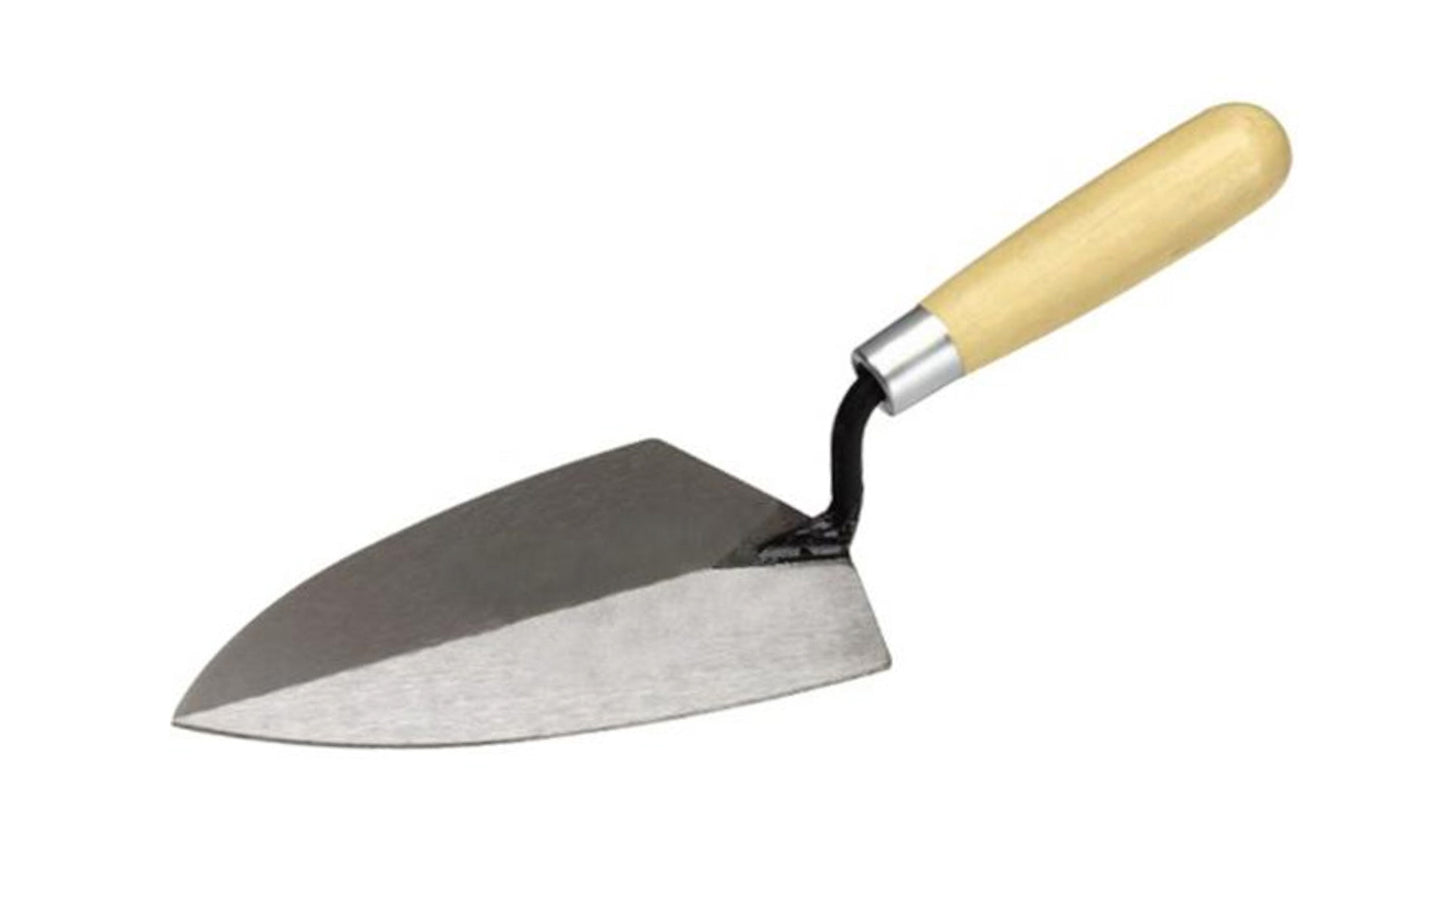 Marshalltown contractor-grade QLT Tile Setter's Trowel has durable construction. The tempered blade is fully grounded and polished. Model 927 ~ 035965061278